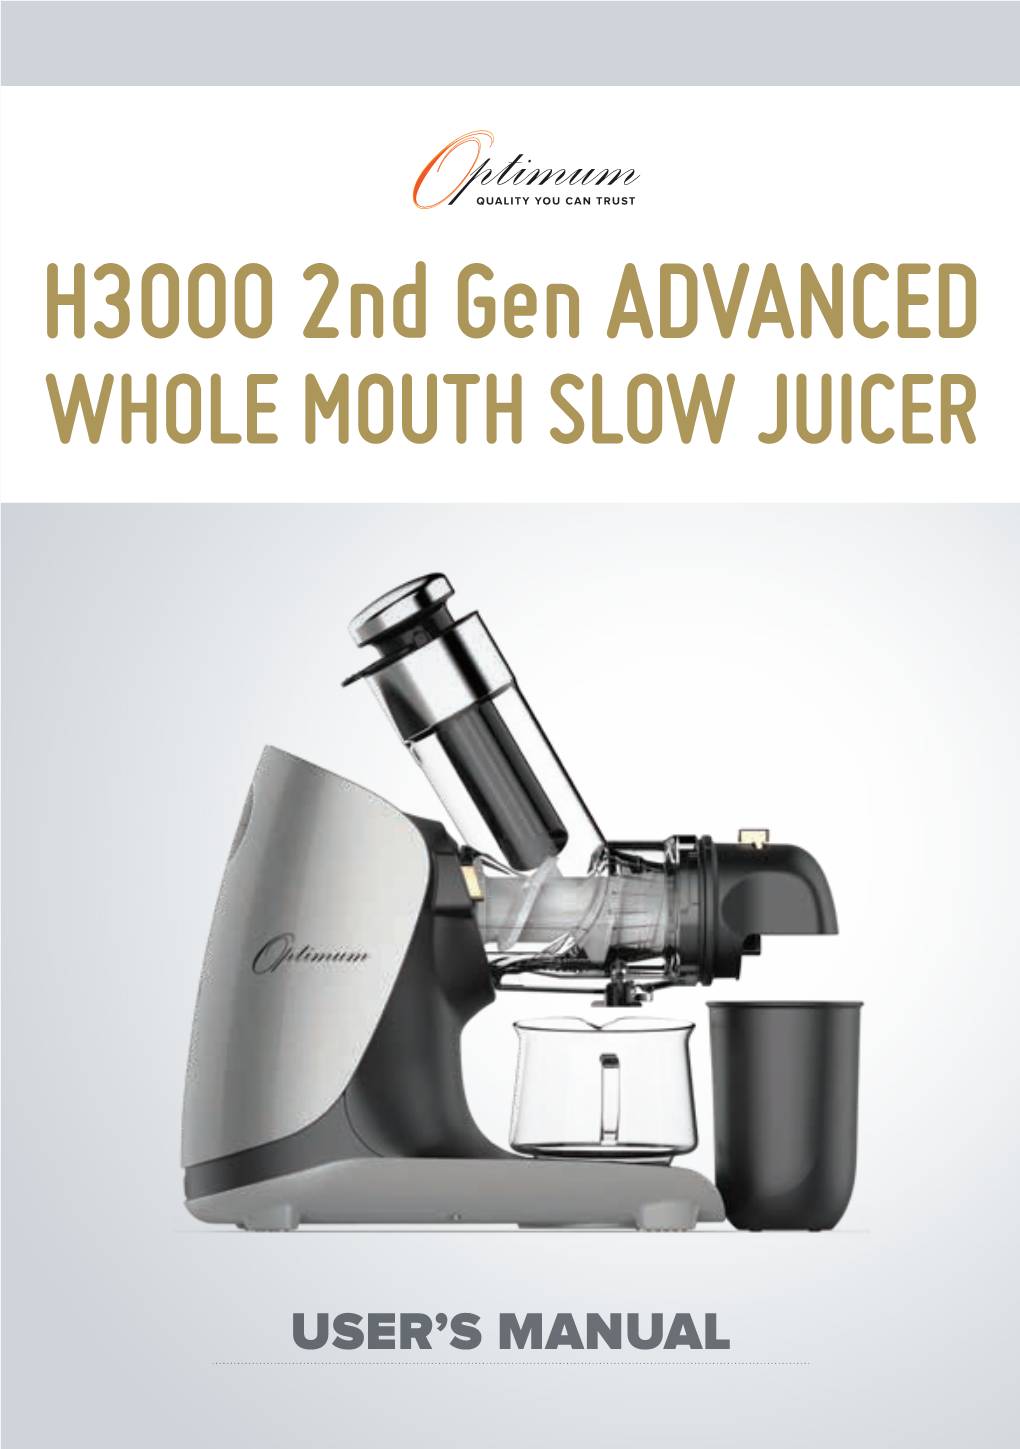 H3000 2Nd Gen ADVANCED WHOLE MOUTH SLOW JUICER